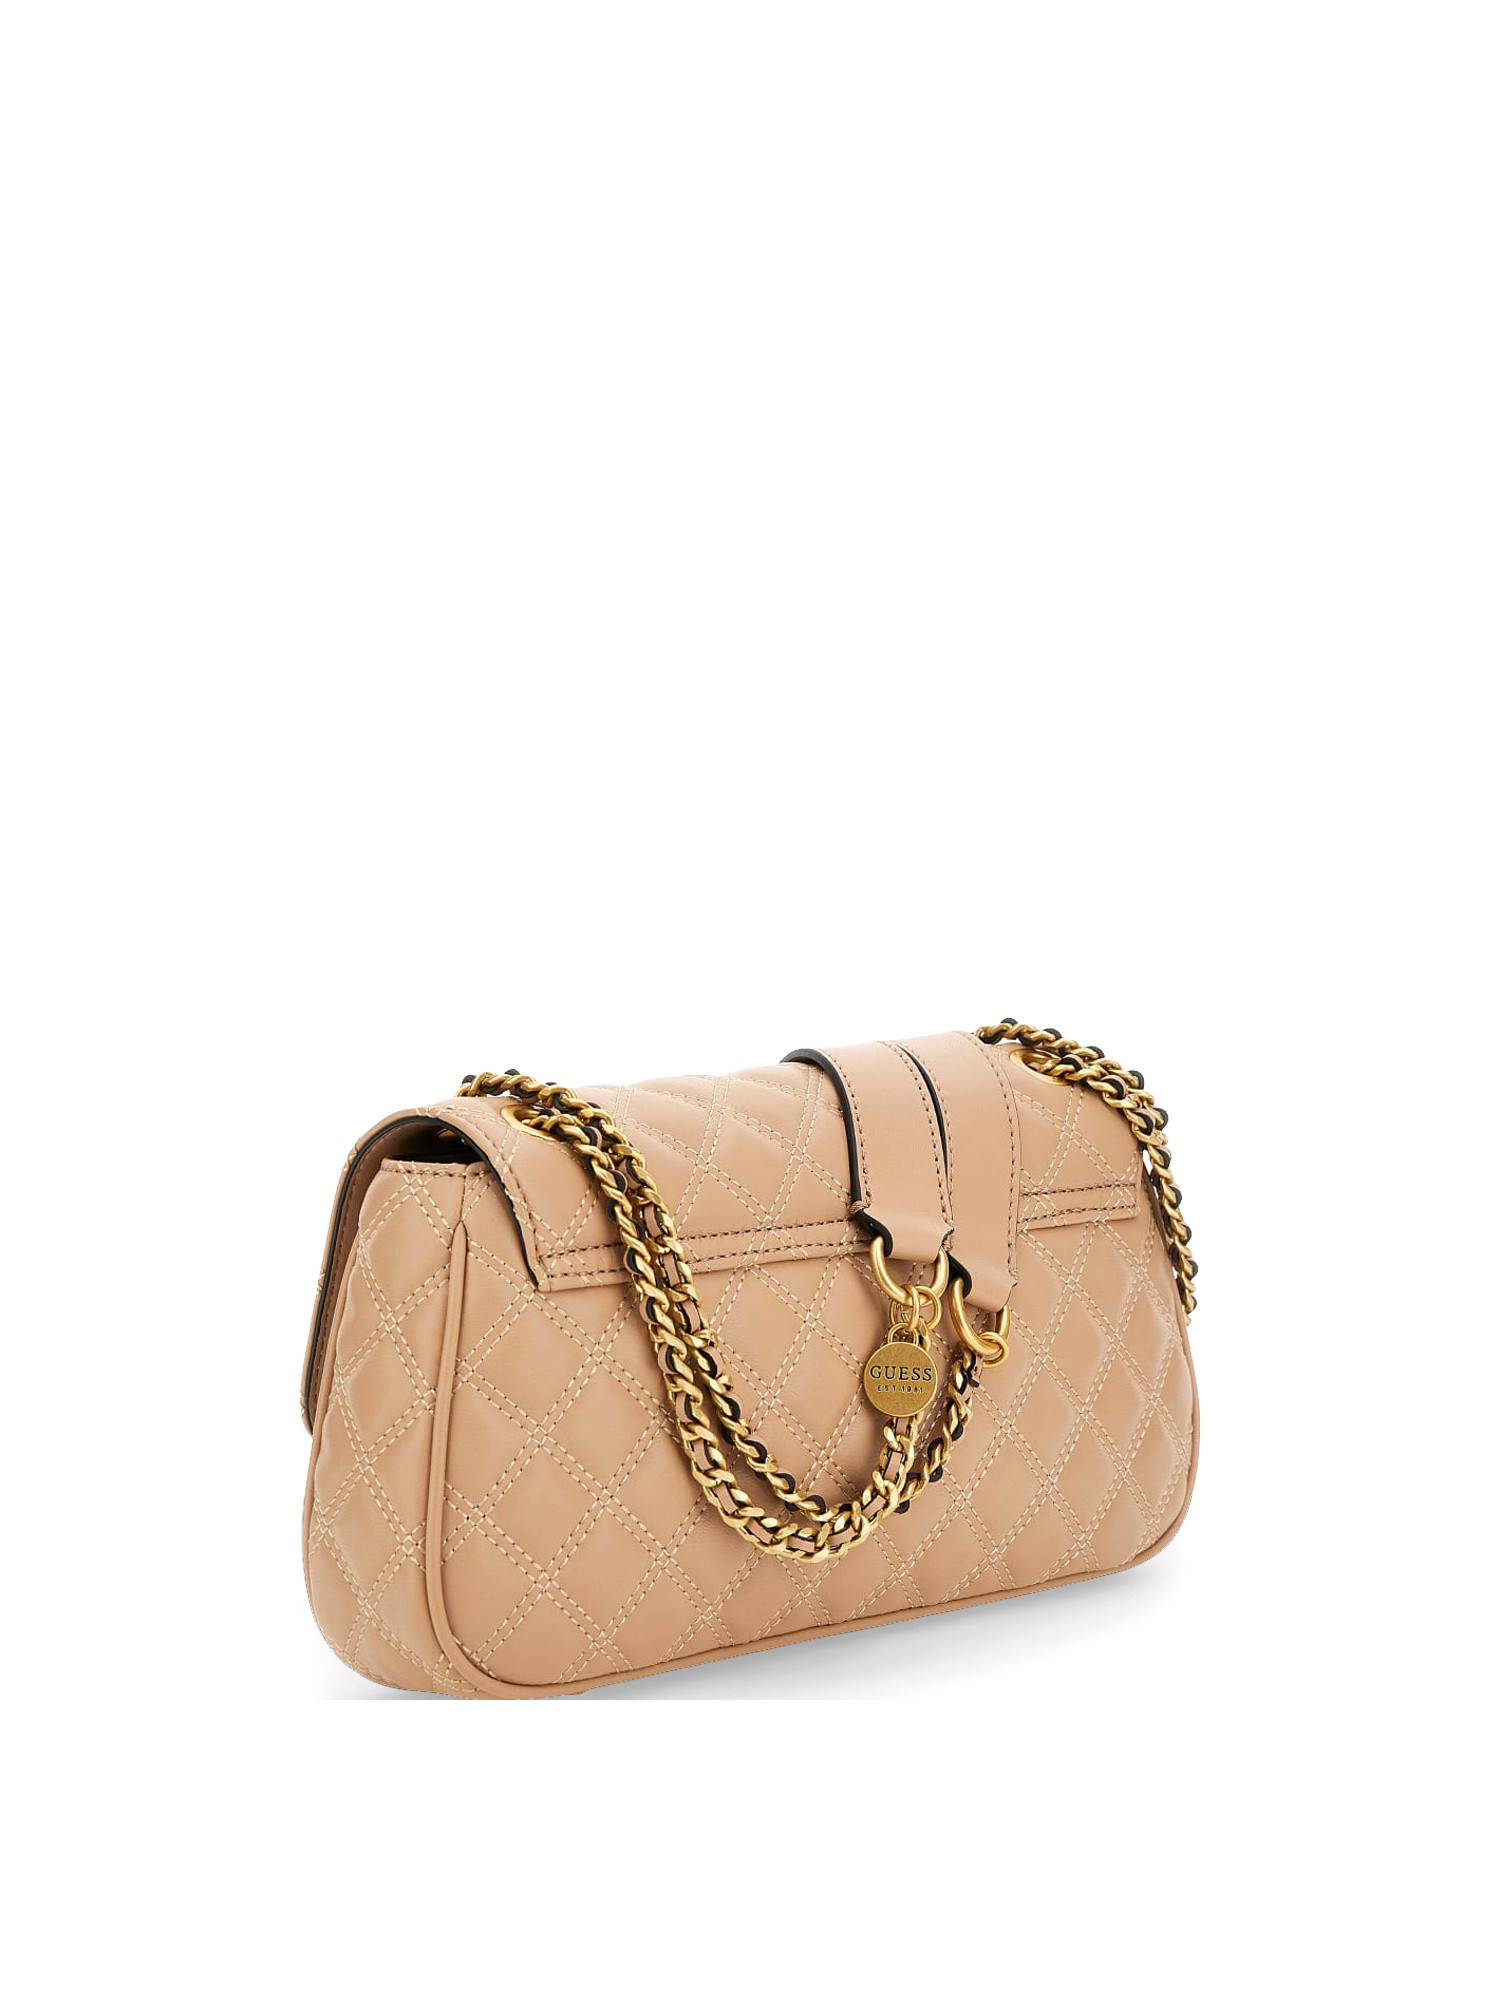 Guess - Borsa a tracolla trapuntata Giully, Beige, large image number 1